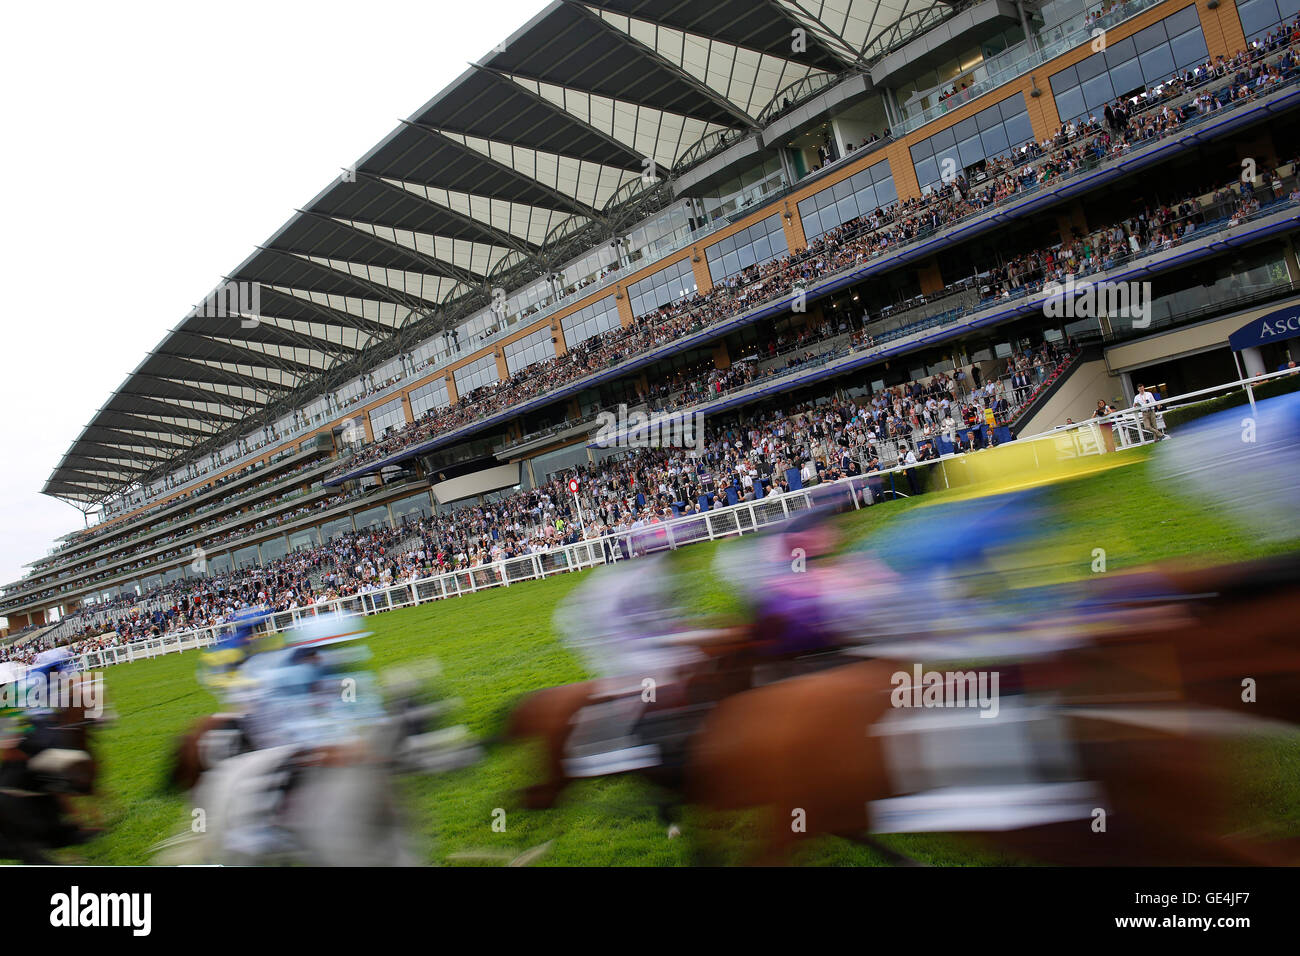 Runners pass the stands for the first time during The John Guest Brown Jack Stakes Race run on day one of the King George VI Weekend at Ascot Racecourse. PRESS ASSCOCIATION Photo. Picture date: Friday July 22, 2016. See PA story RACING Ascot. Photo credit should read: Julian Herbert/PA Wire. RESTRICTIONS: Use subject to restrictions. Editorial use only, no commercial or promotional use. No private sales. Call +44 (0)1158 447447 for further information. Stock Photo